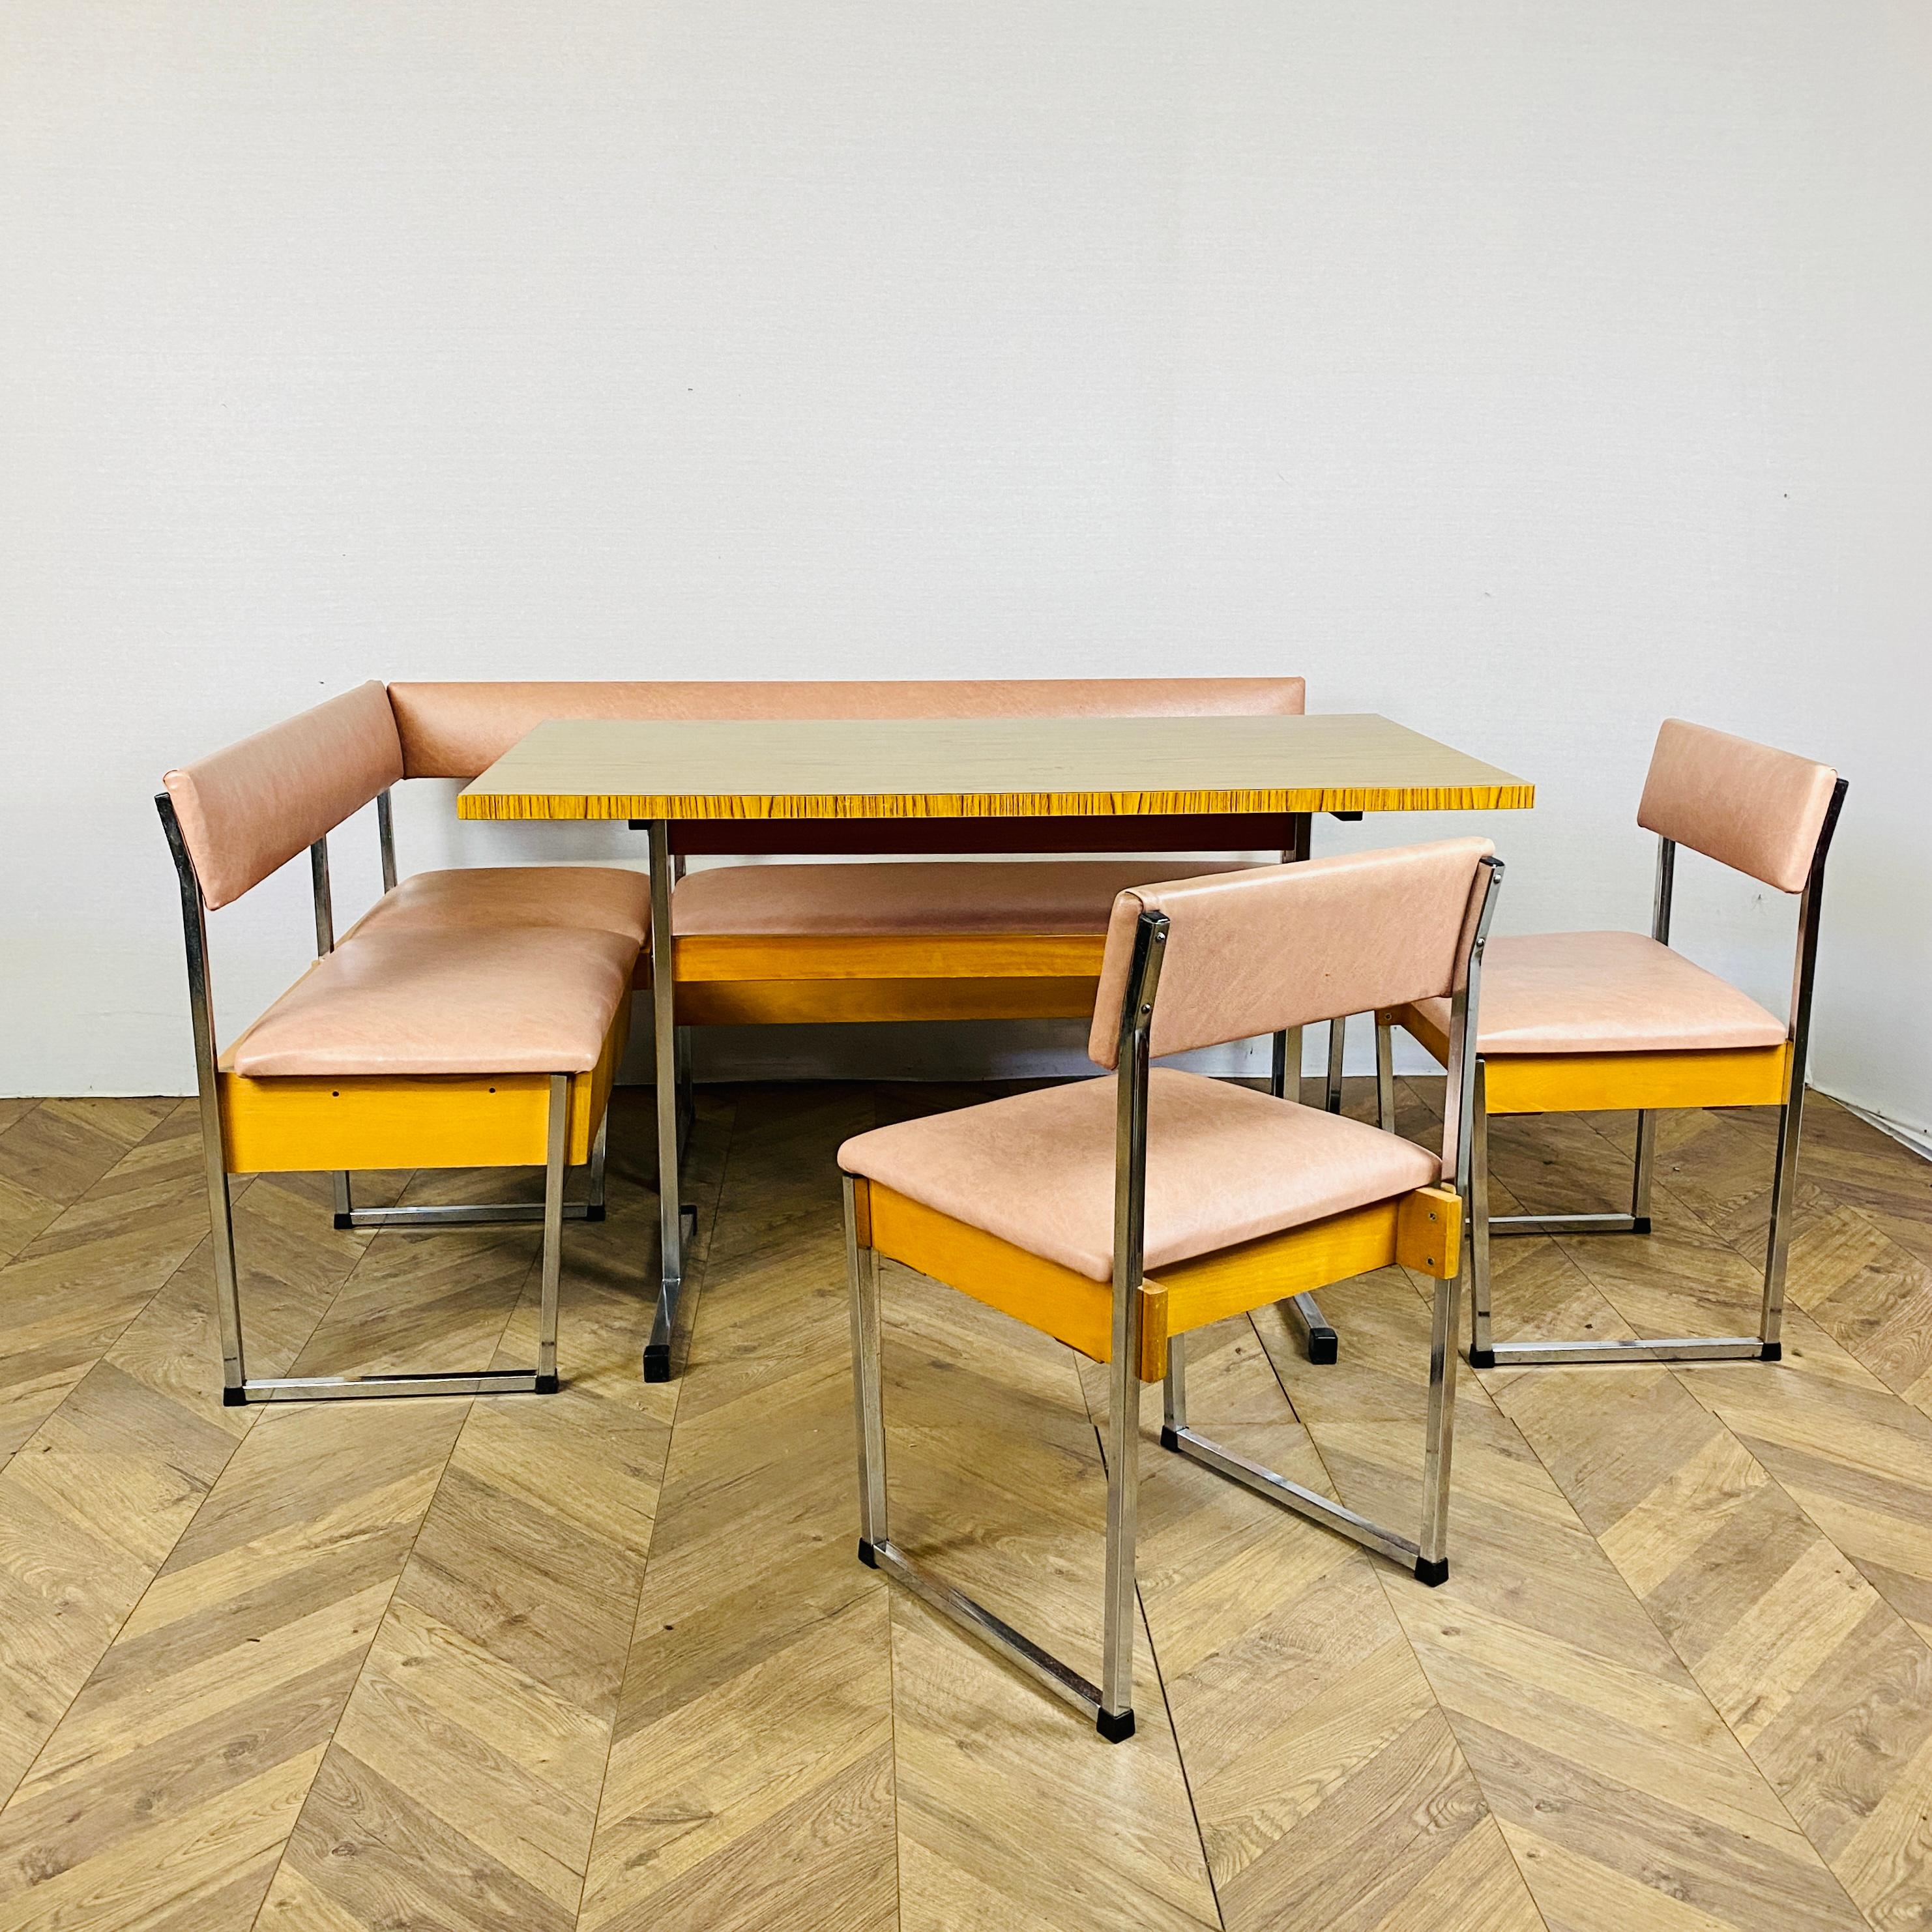 Vintage corner dining set, which includes a dining table, a banquette corner seat and 2 dining chairs, circa late 1960s / early 1970s.

The set features chrome legs throughout and soft pink vinyl upholstery, both of which are in great